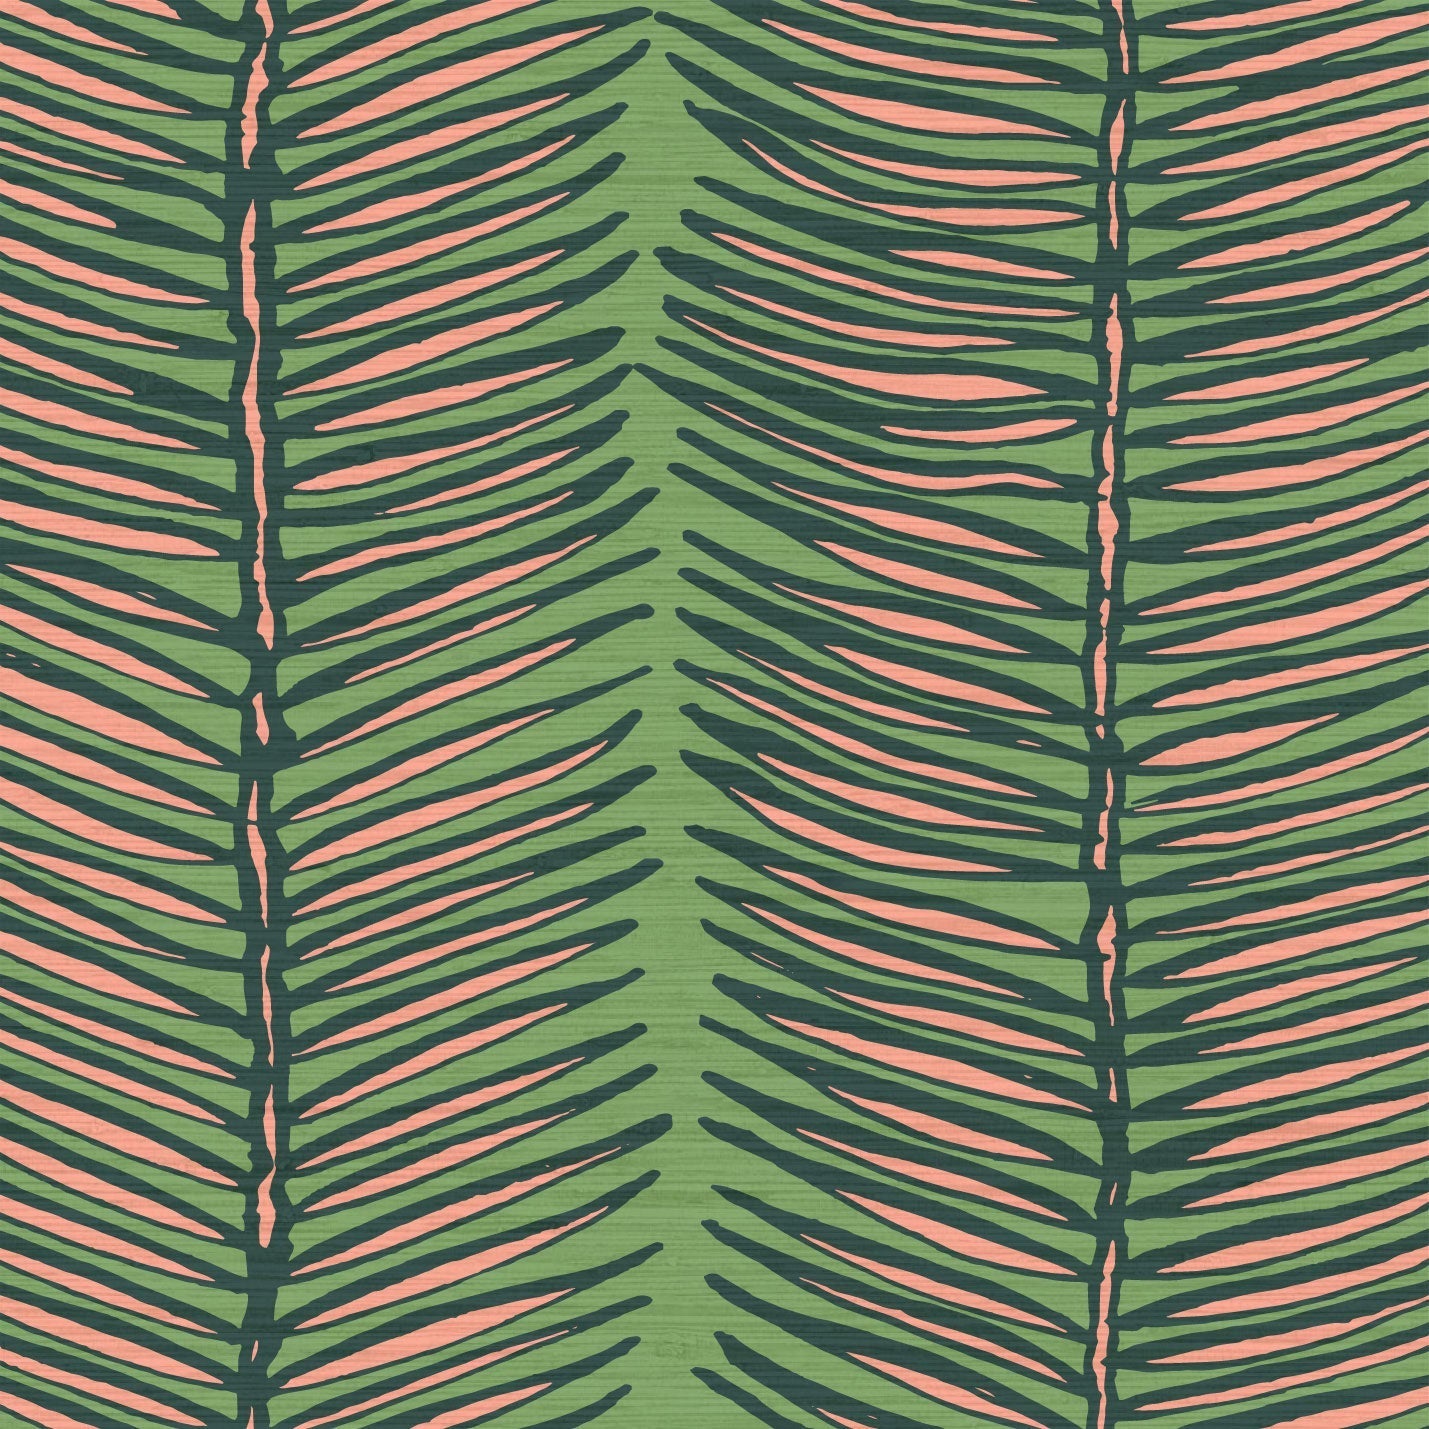 Grasscloth wallpaper Natural Textured Eco-Friendly Non-toxic High-quality Sustainable Interior Design Bold Custom Tailor-made Retro chic Tropical Jungle Coastal Garden Seaside Seashore Waterfront Vacation home styling Retreat Relaxed beach vibes Beach cottage Shoreline Oceanfront Nautical Cabana preppy palm fern leaf vertical stripe jungle green neon pink